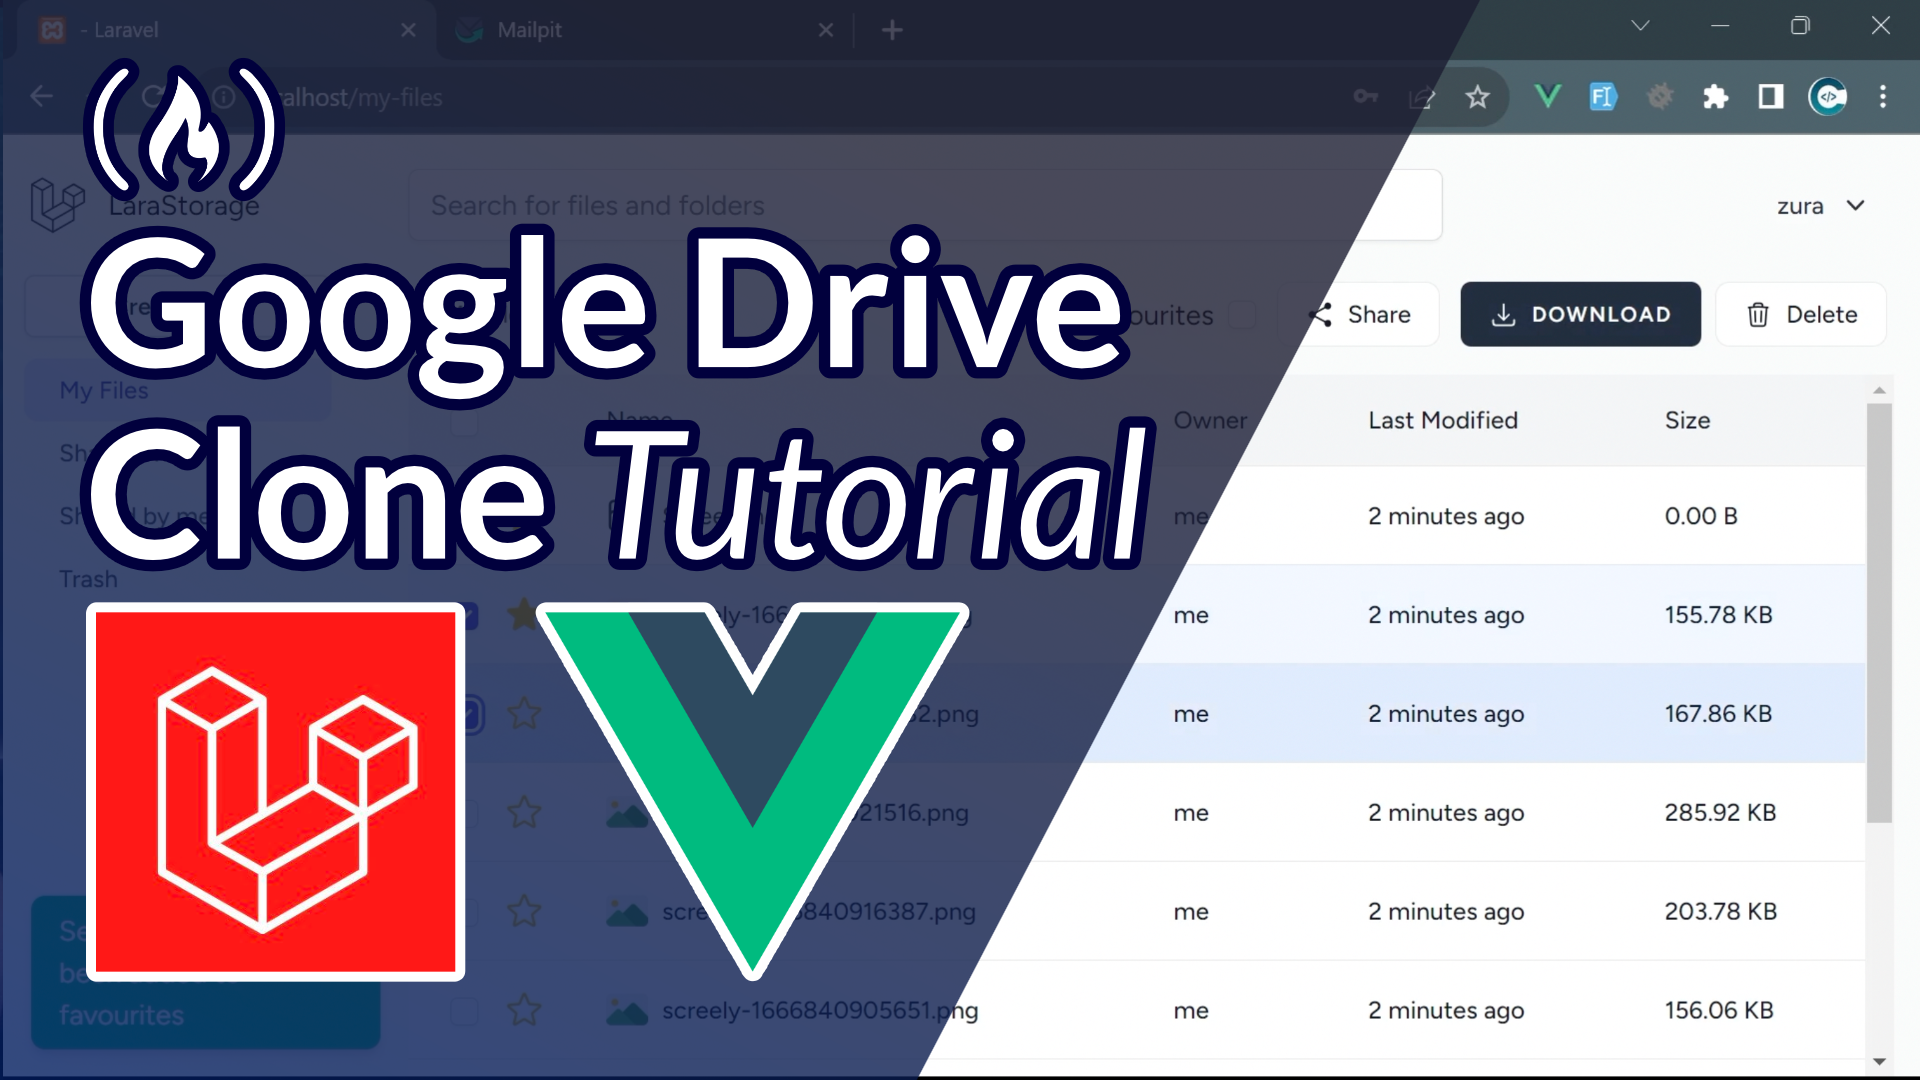 Build a Google Drive Clone with Laravel, PHP, and Vue.js